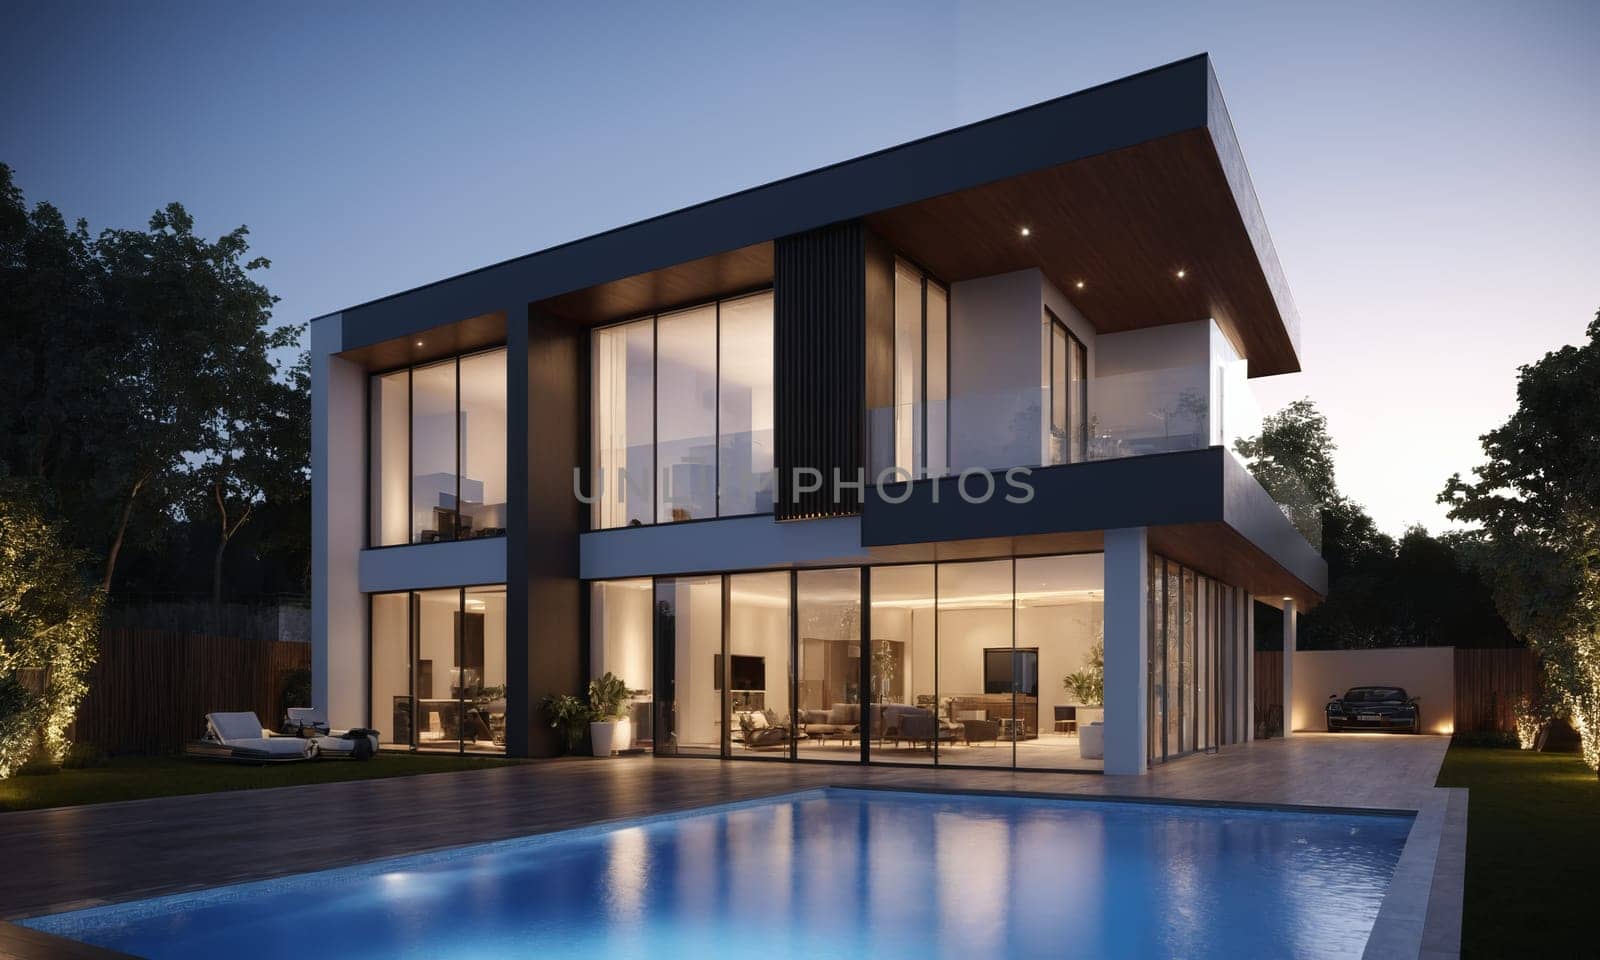 3d rendering of modern cozy house with pool and parking for sale or rent.